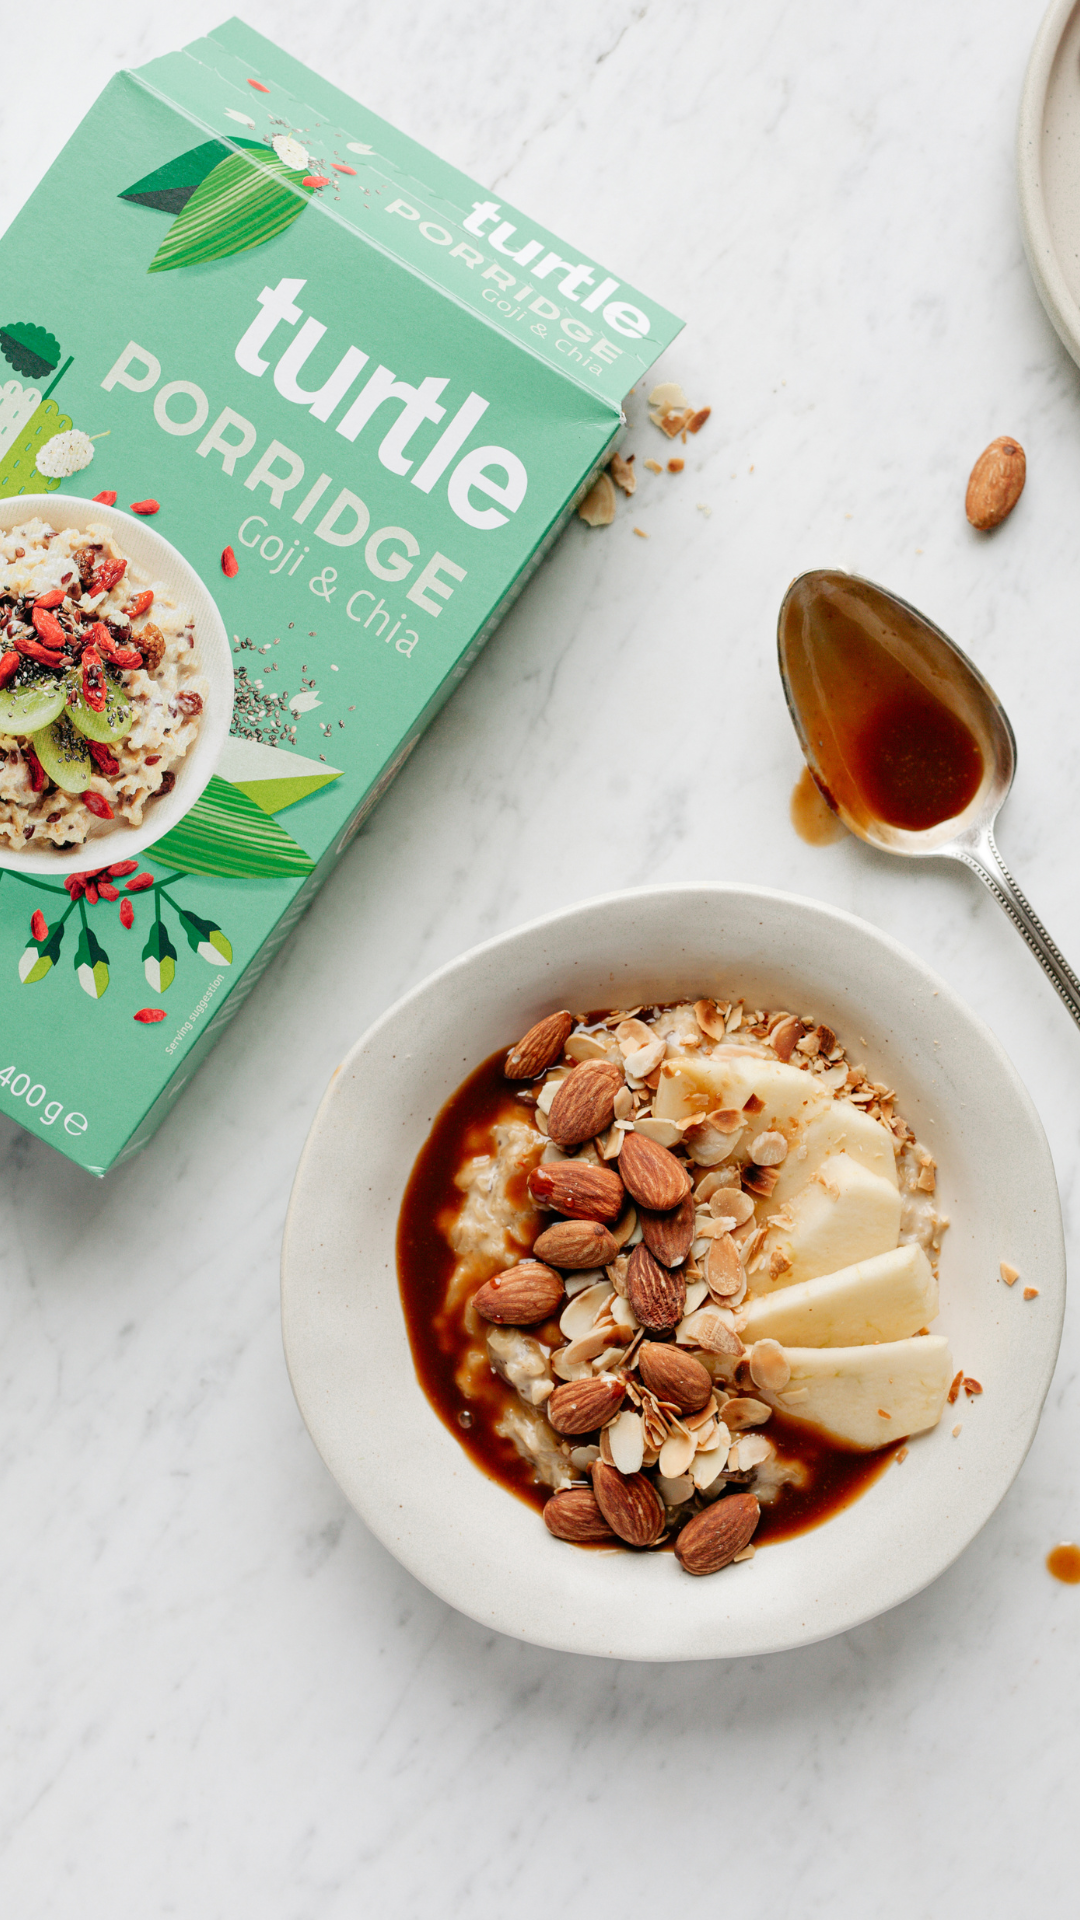 Porridge Goji and Chia with Fresh Apple, Roasted Almond, and Salted Caramel